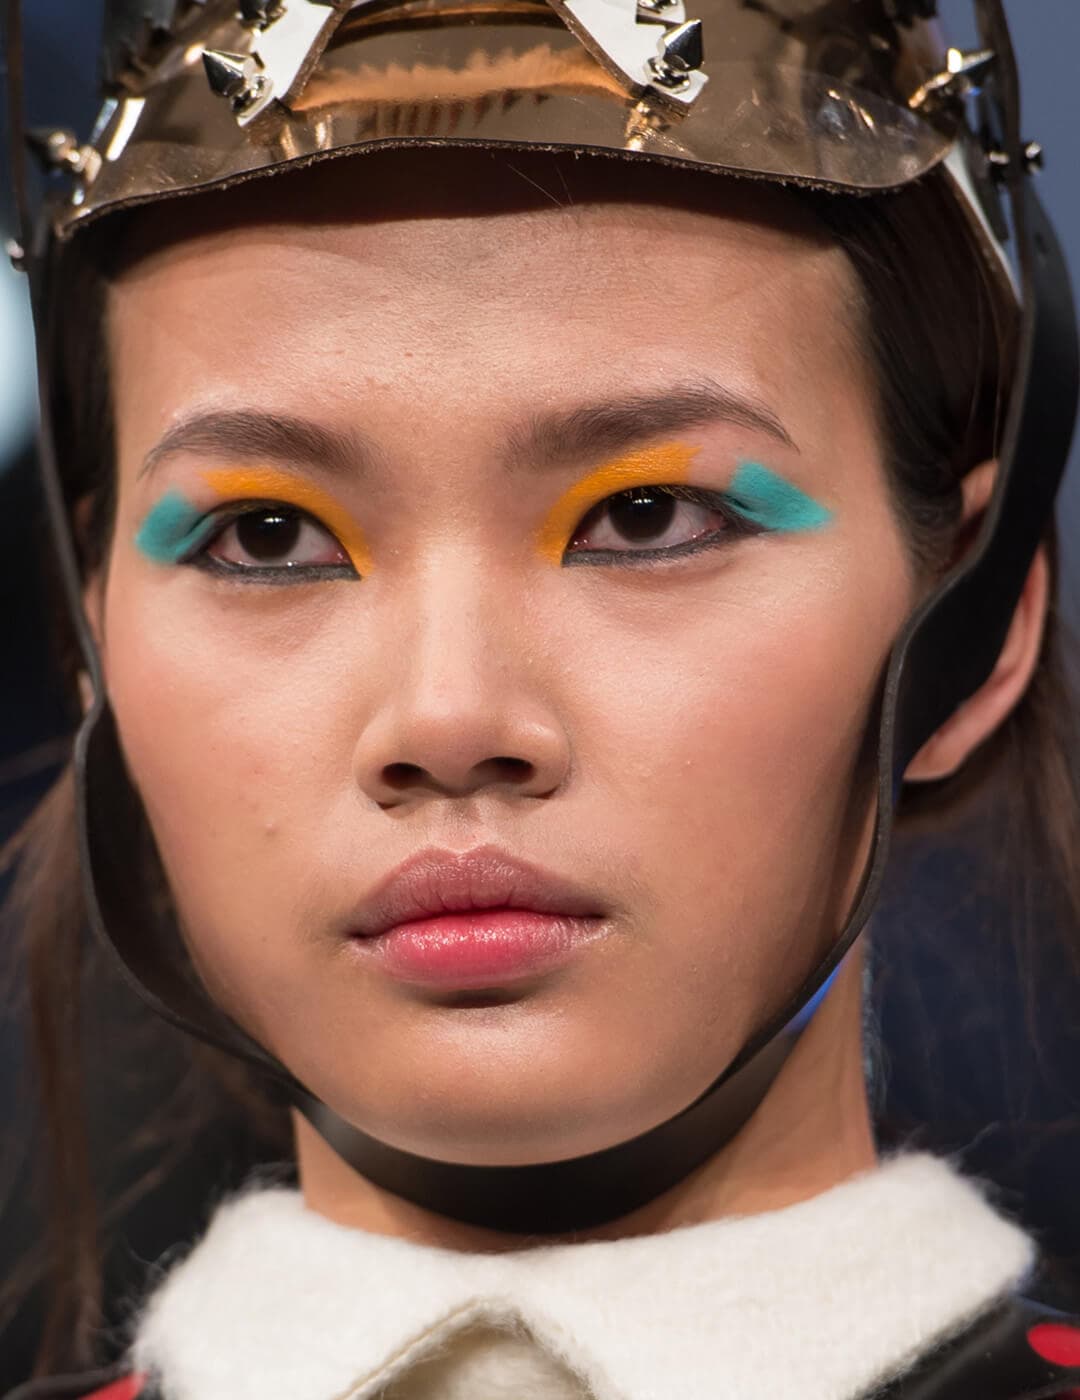 Model wearing a brown leather head piece and blue and orange eye makeup